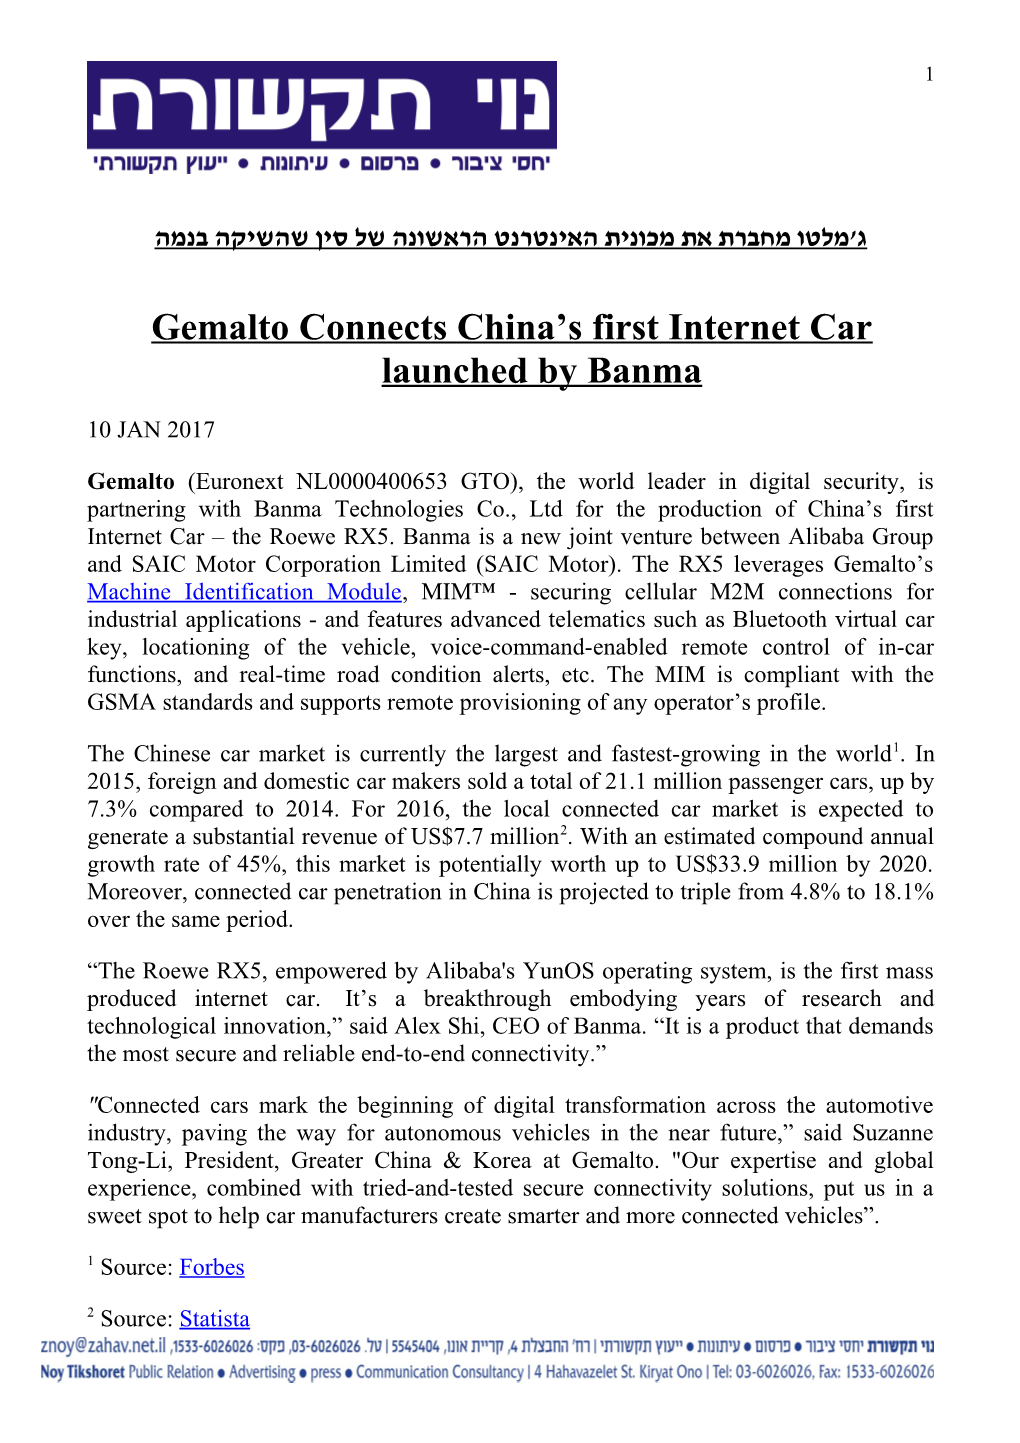 Gemalto Connects China S First Internet Car Launched by Banma